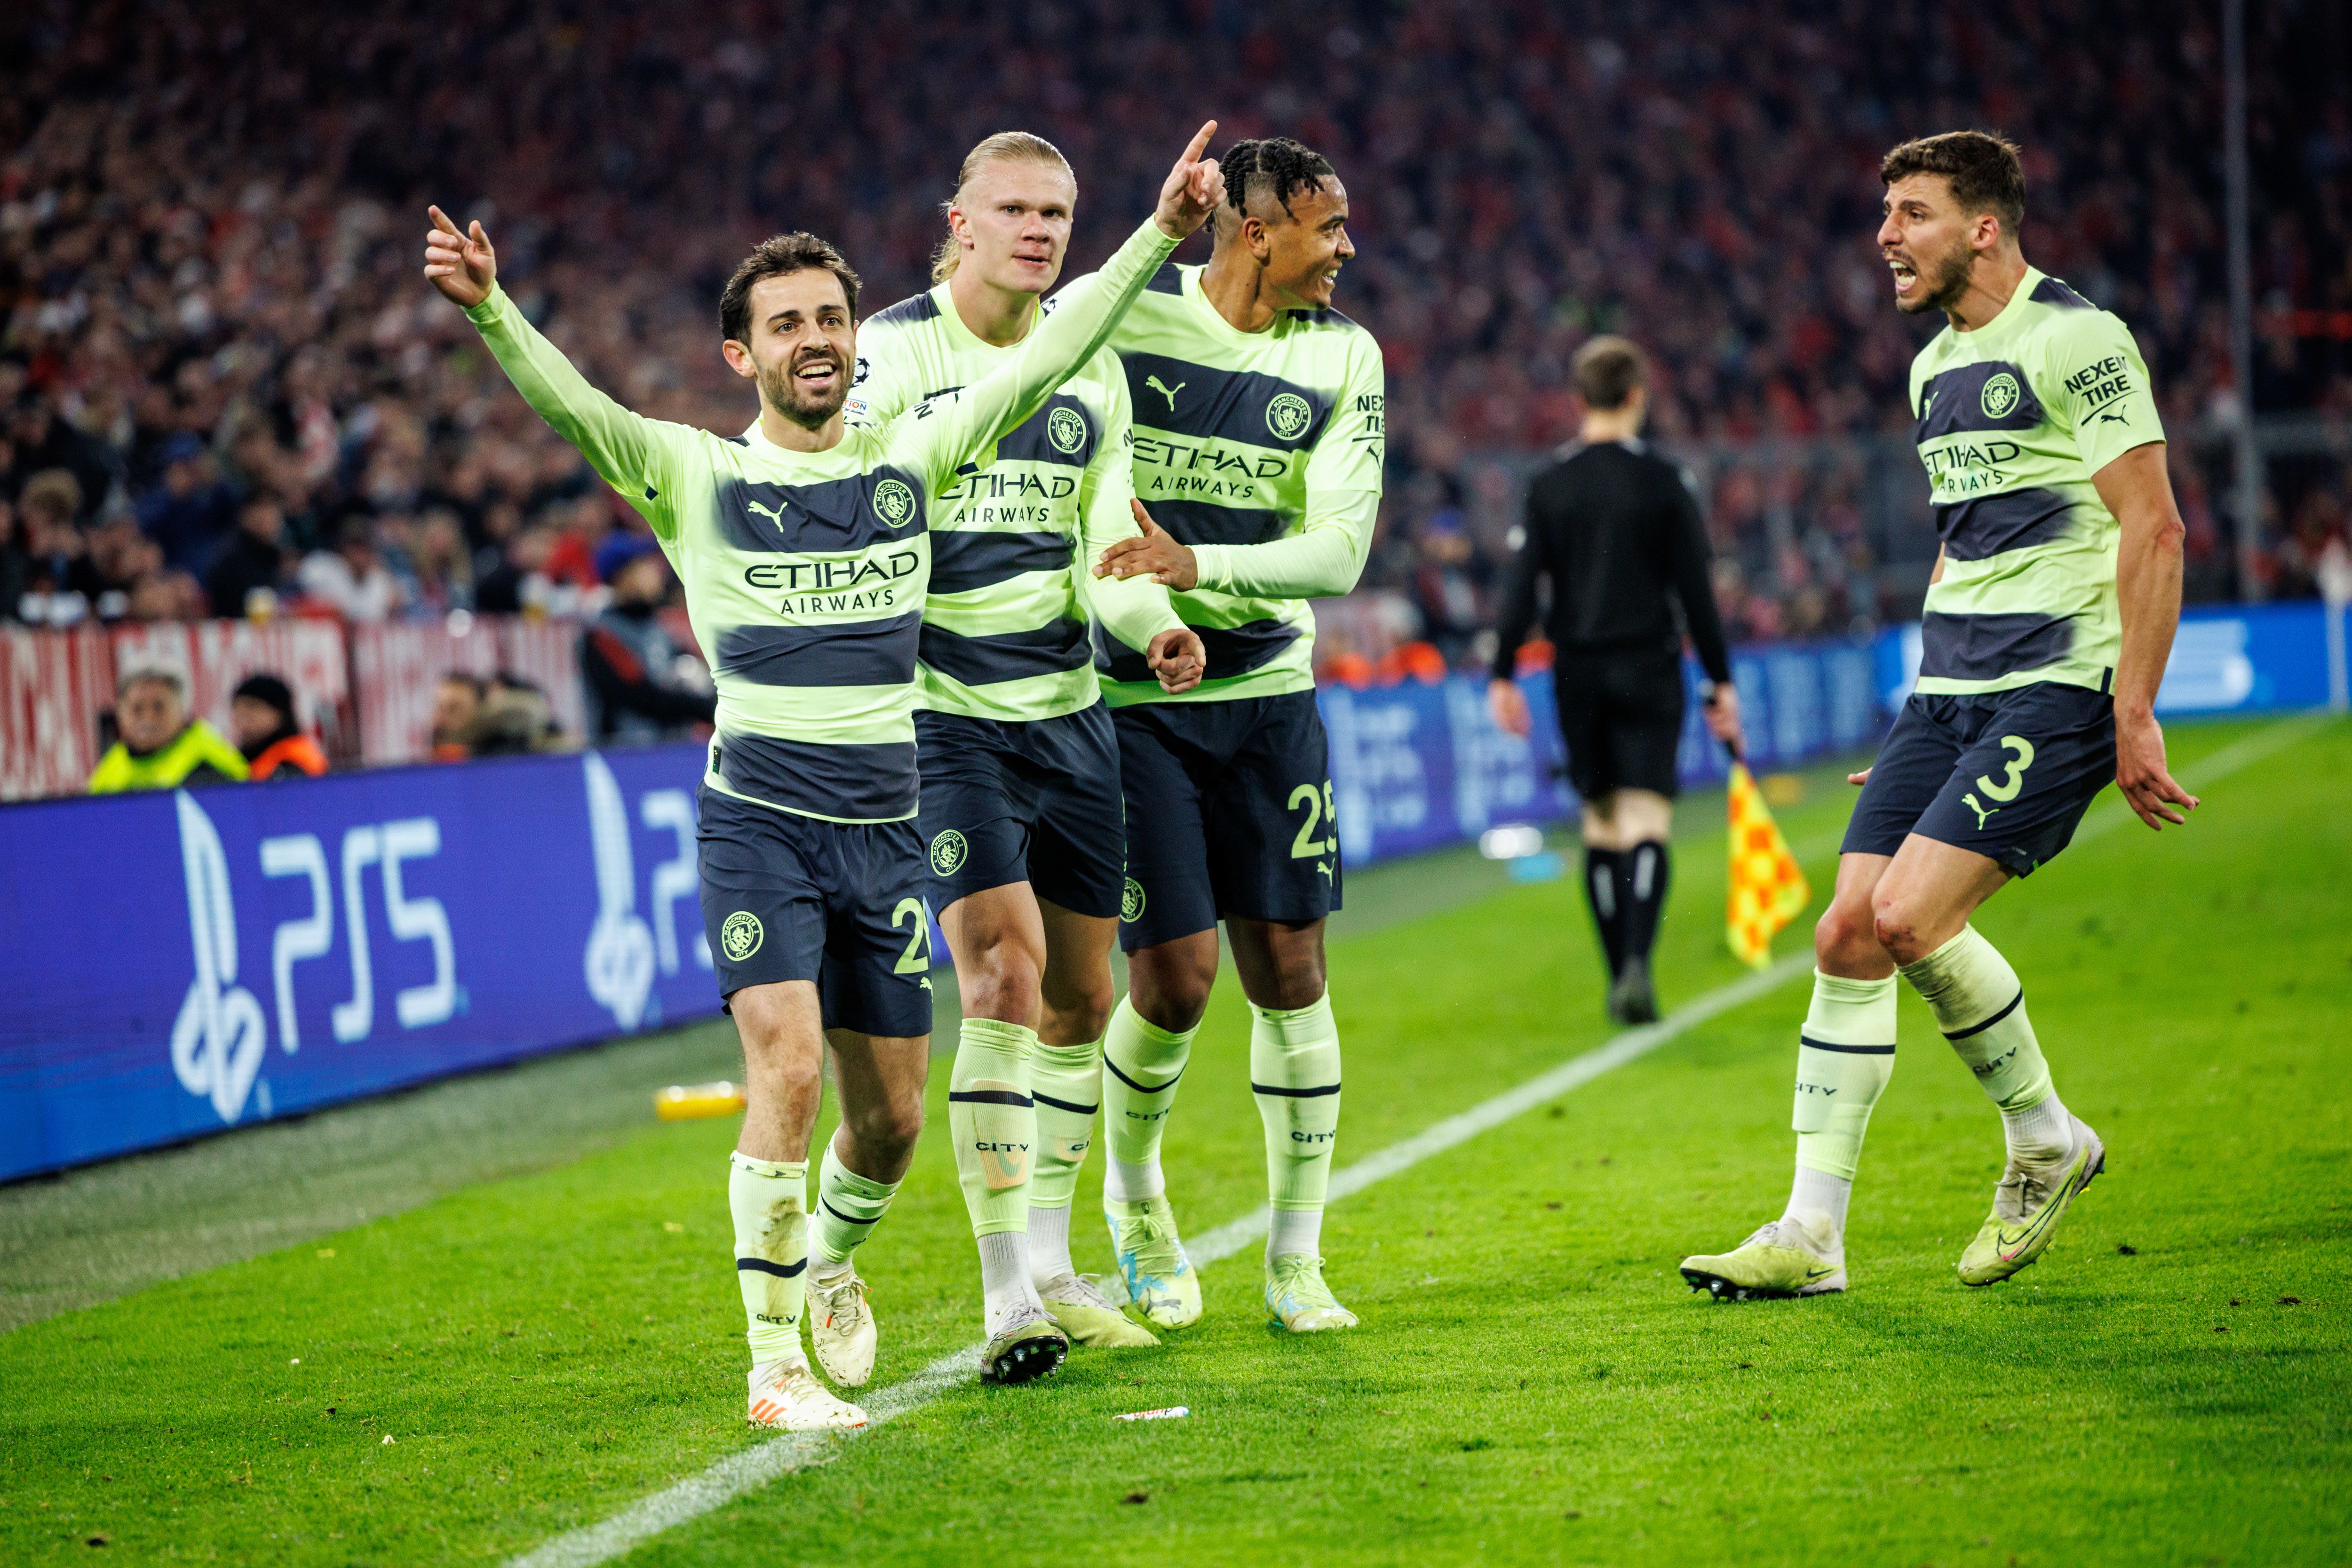 Manchester City: Find out more on Bayern's quarter-final opponent